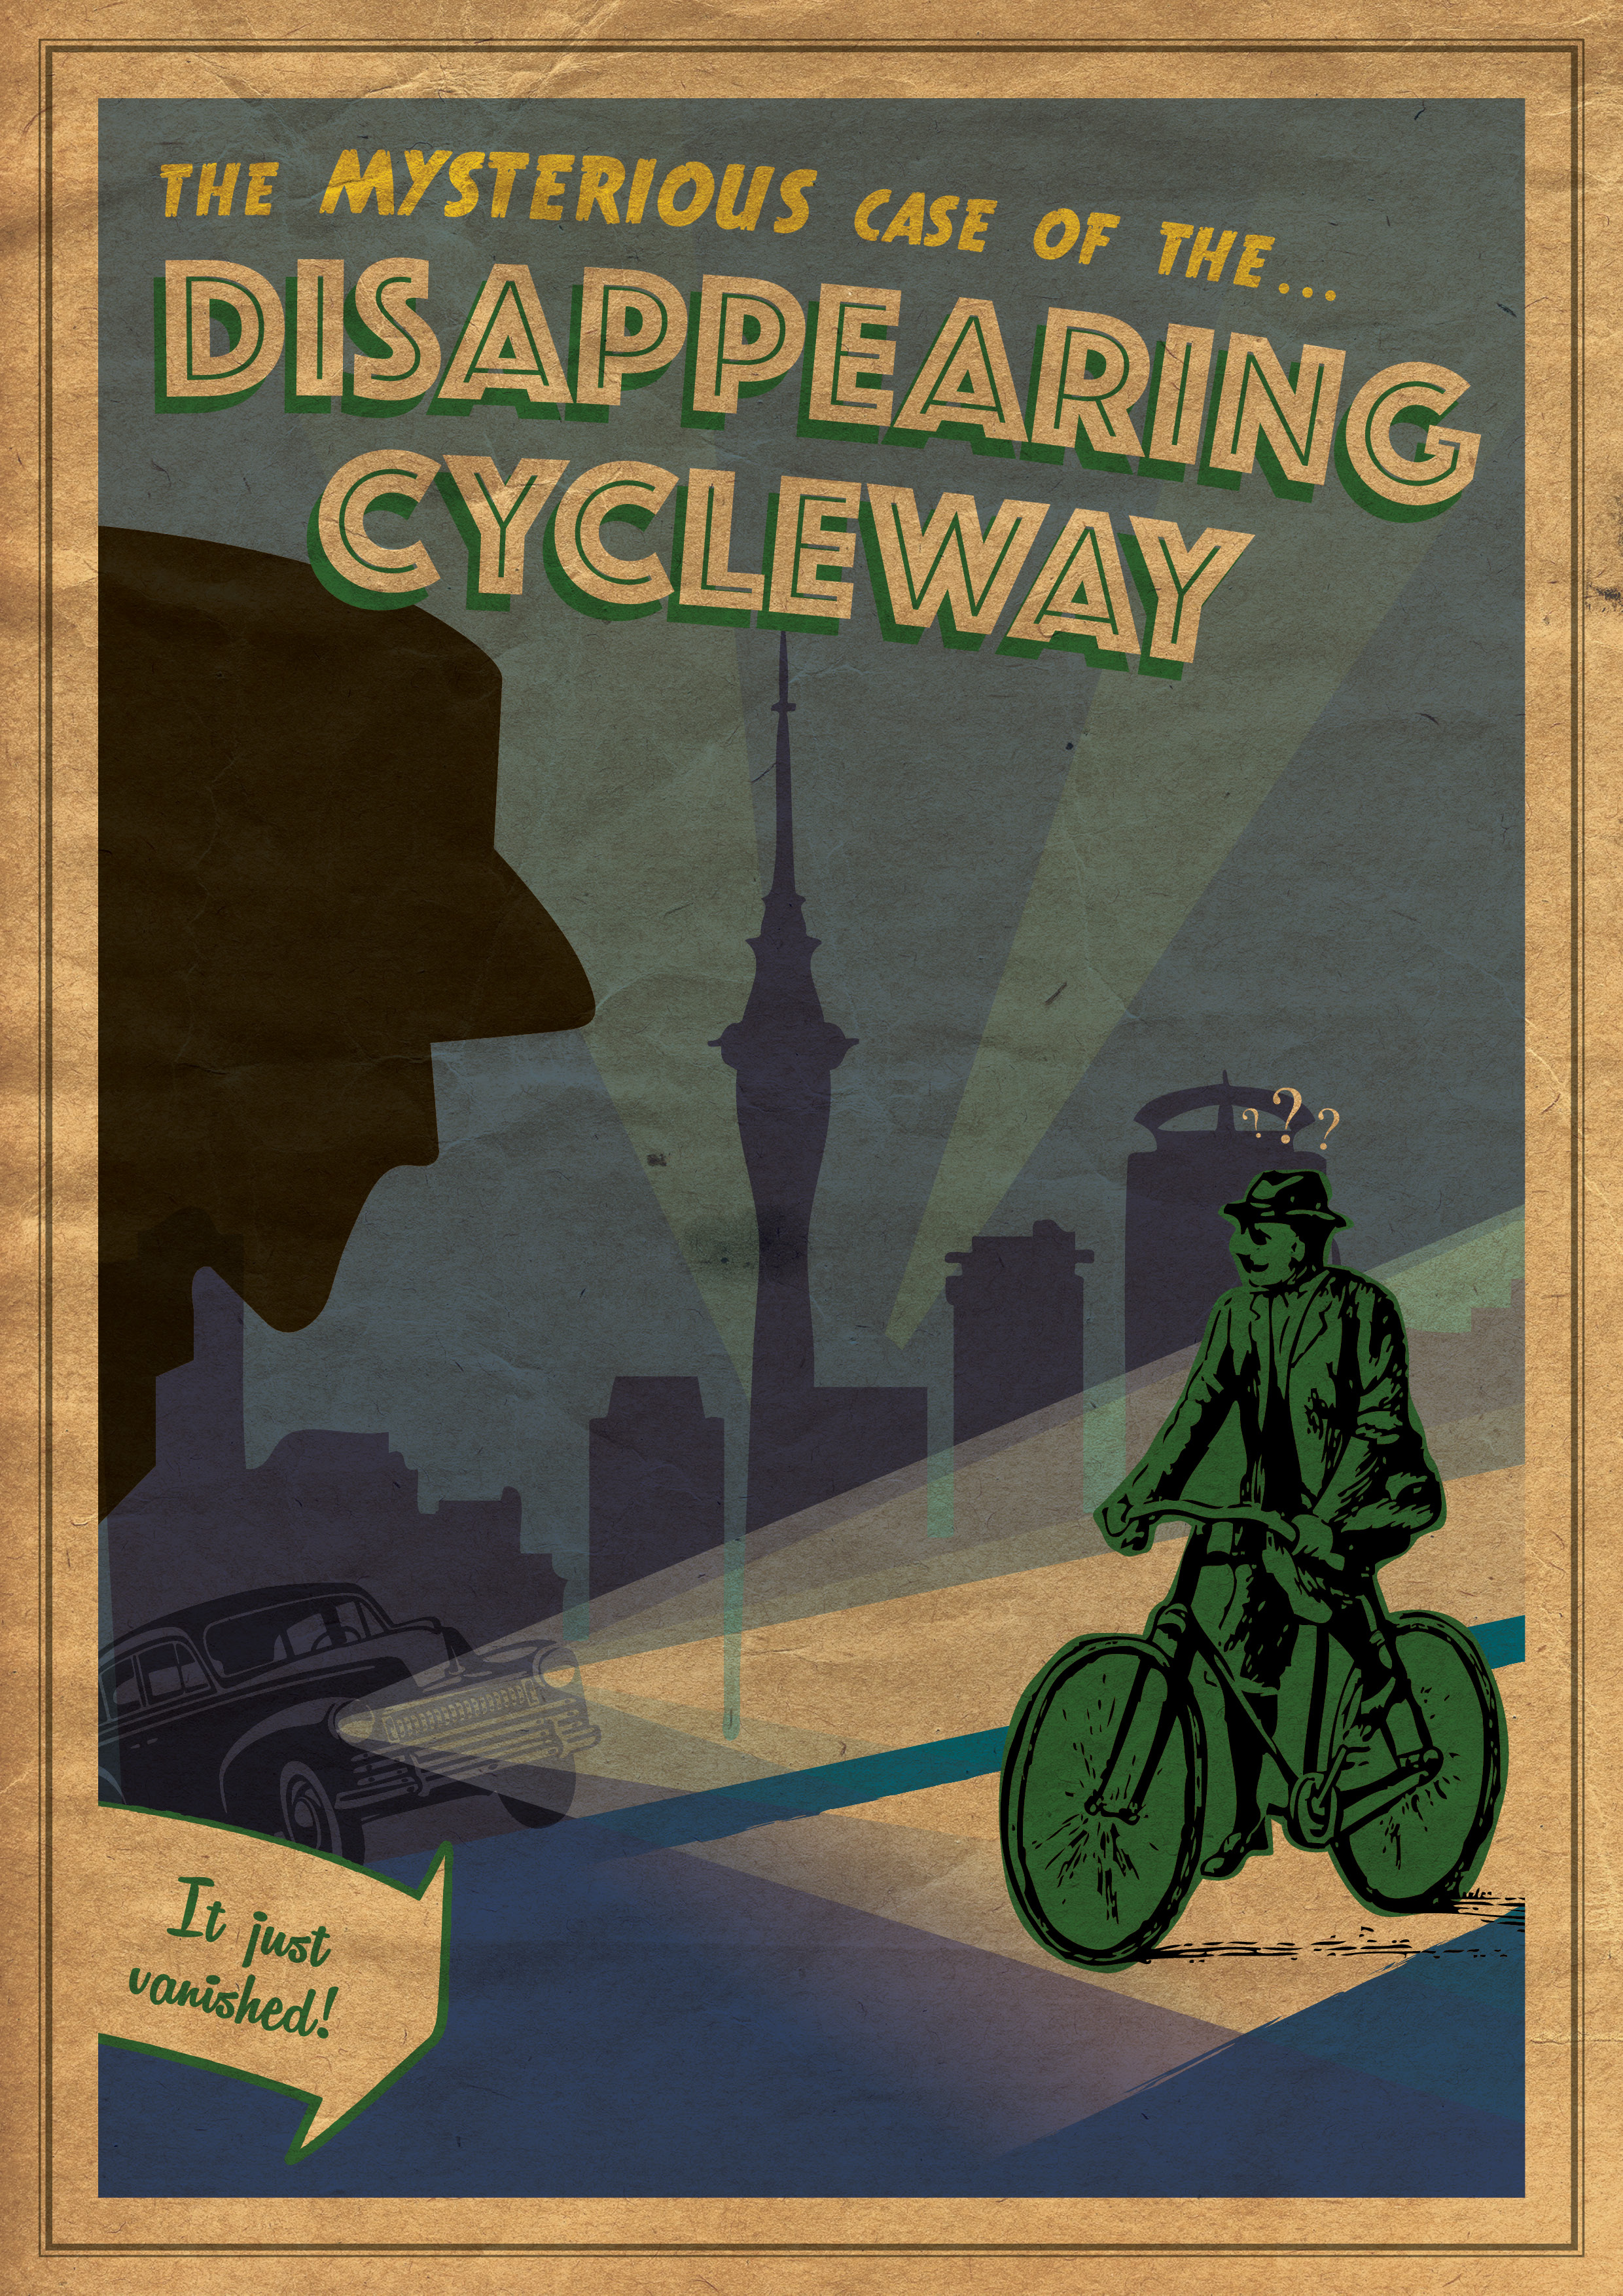 The case of the disappearing cycleway. [Credit: Doug Gaylard]